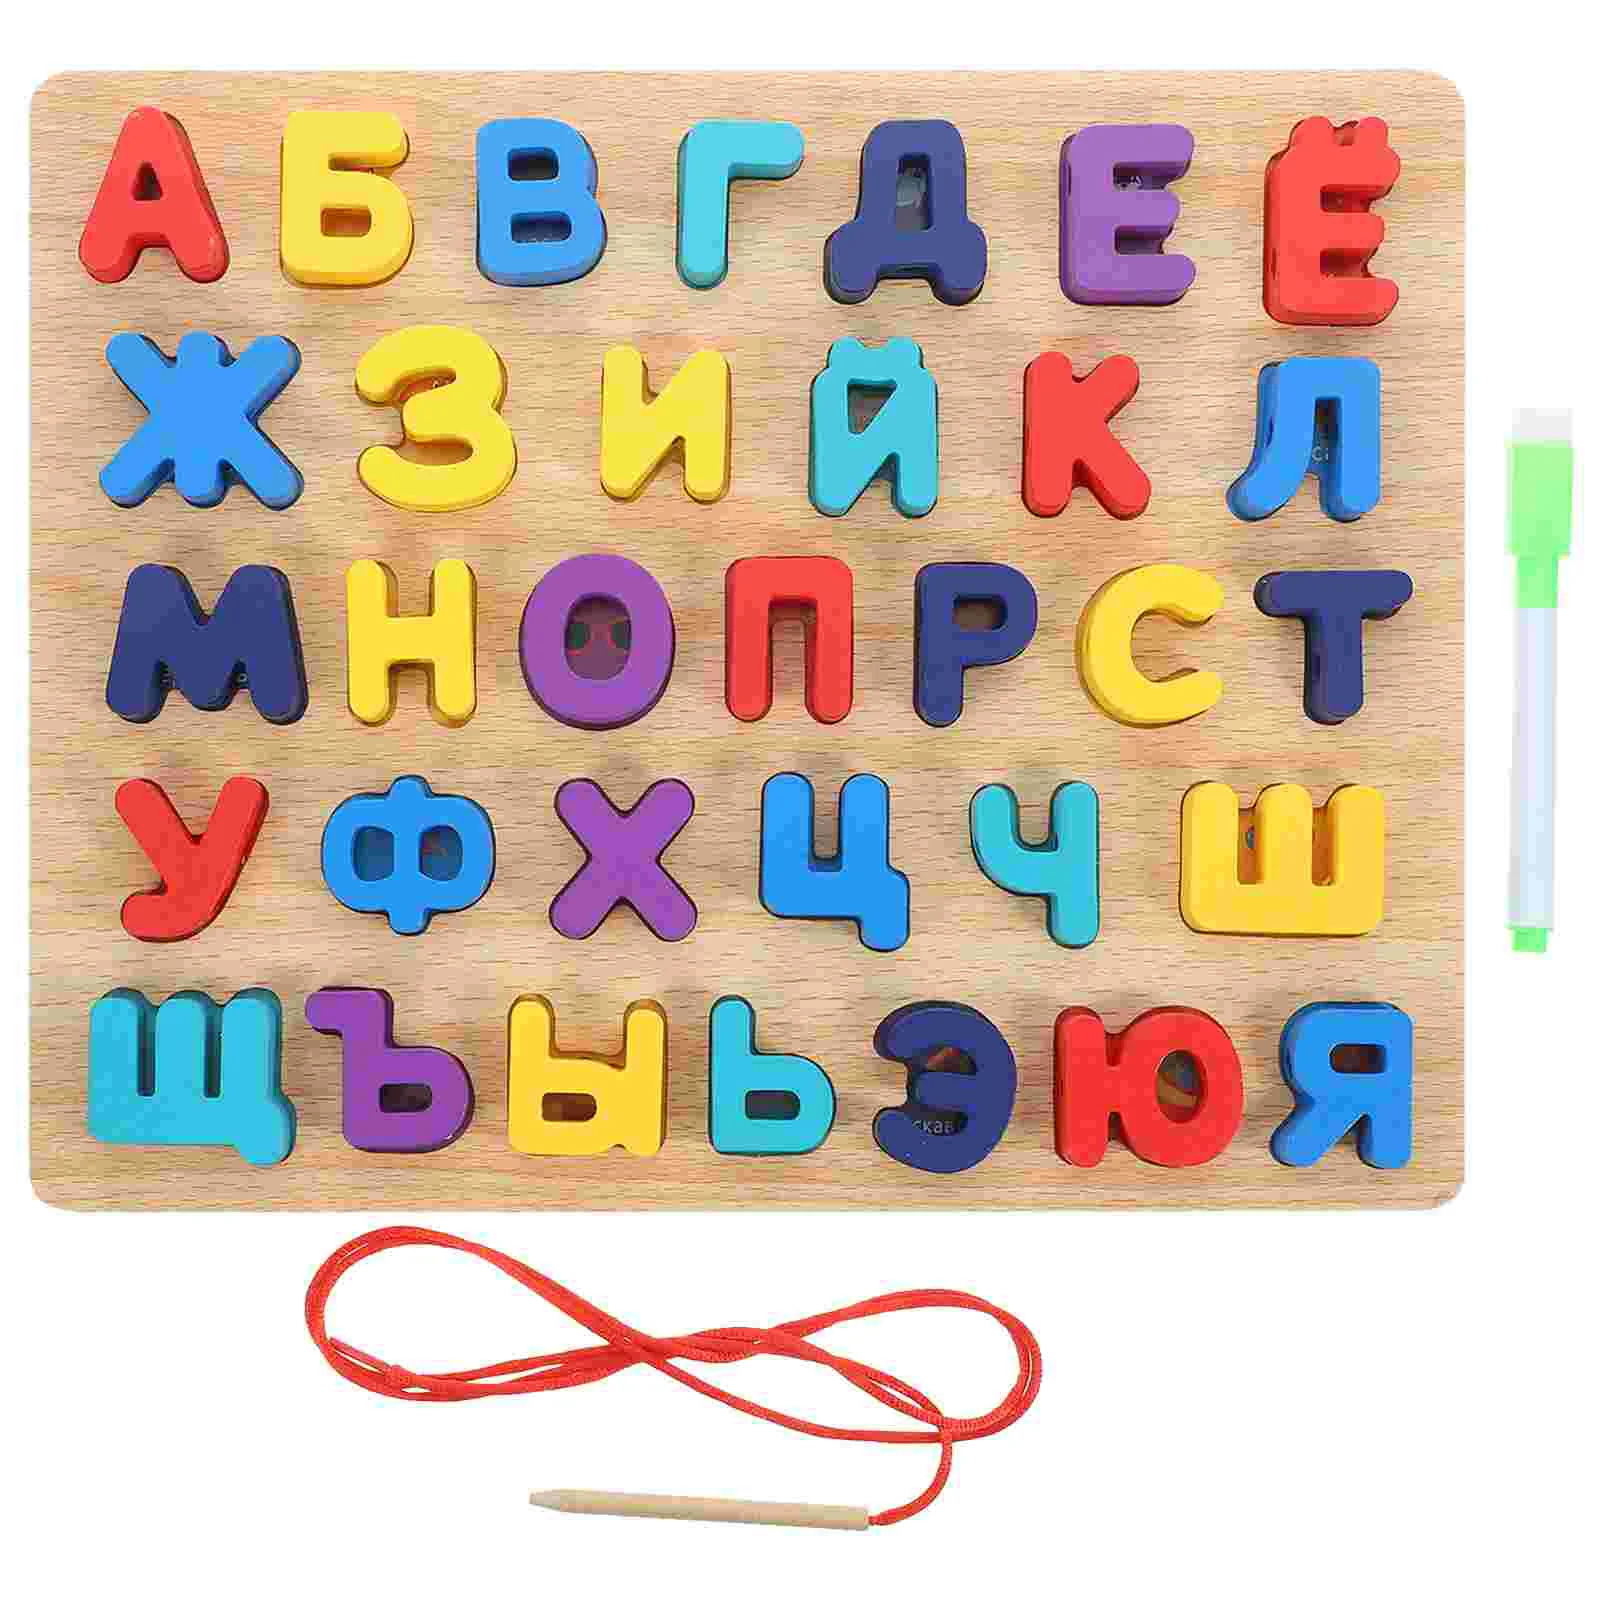 

Russian Puzzle Montessori Educational Puzzles Baby Toys Children Beads Threading Jigsaw for Kids Wooden Lacing